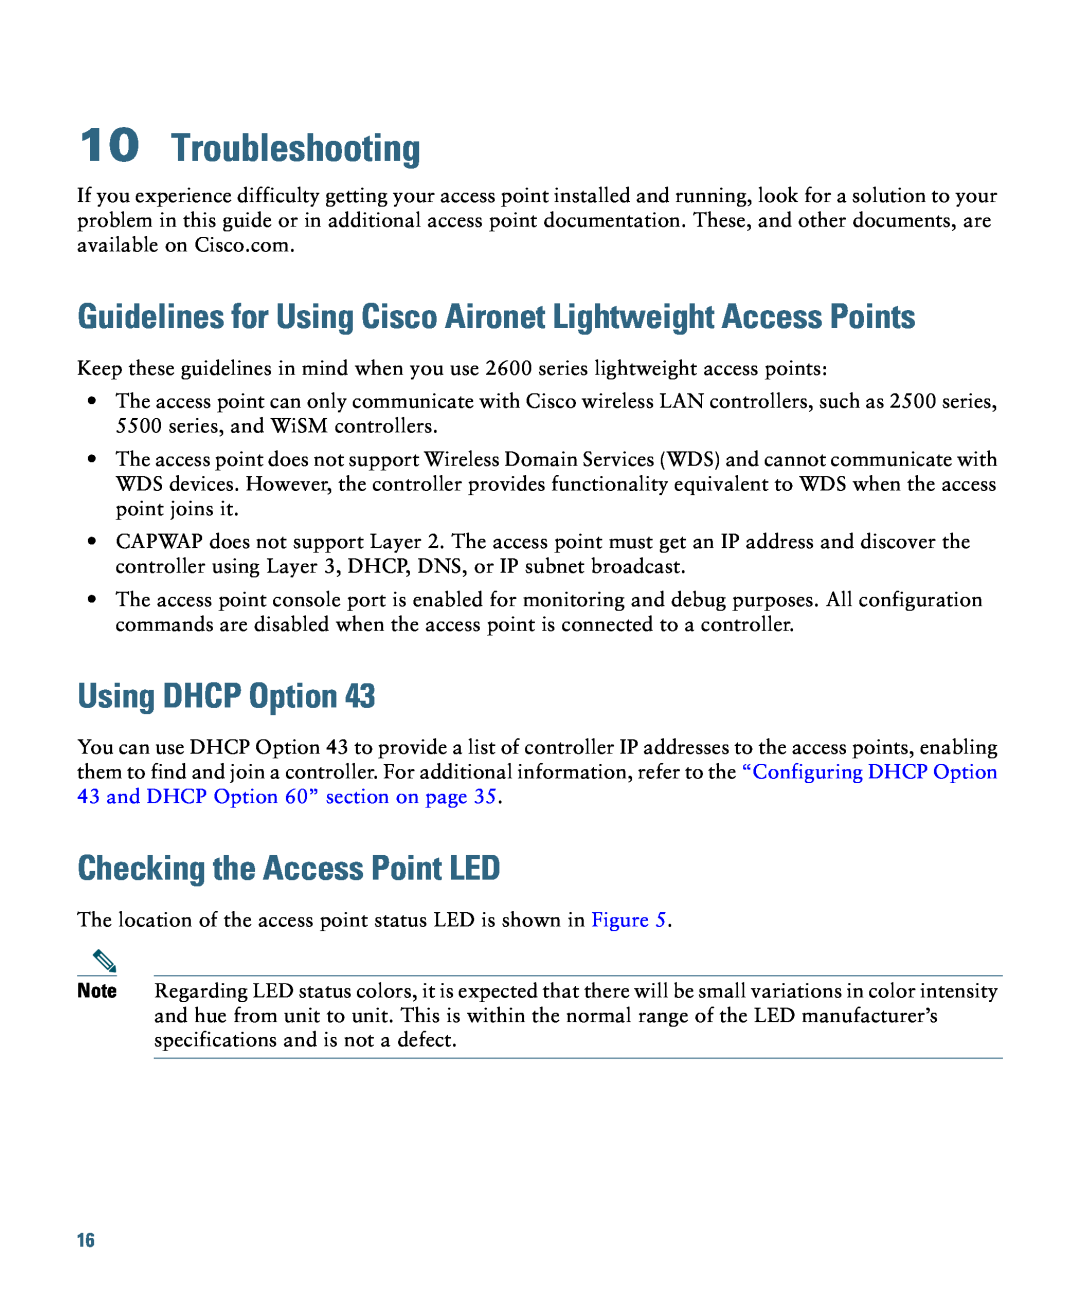 Cisco Systems 2600I Troubleshooting, Guidelines for Using Cisco Aironet Lightweight Access Points, Using DHCP Option 